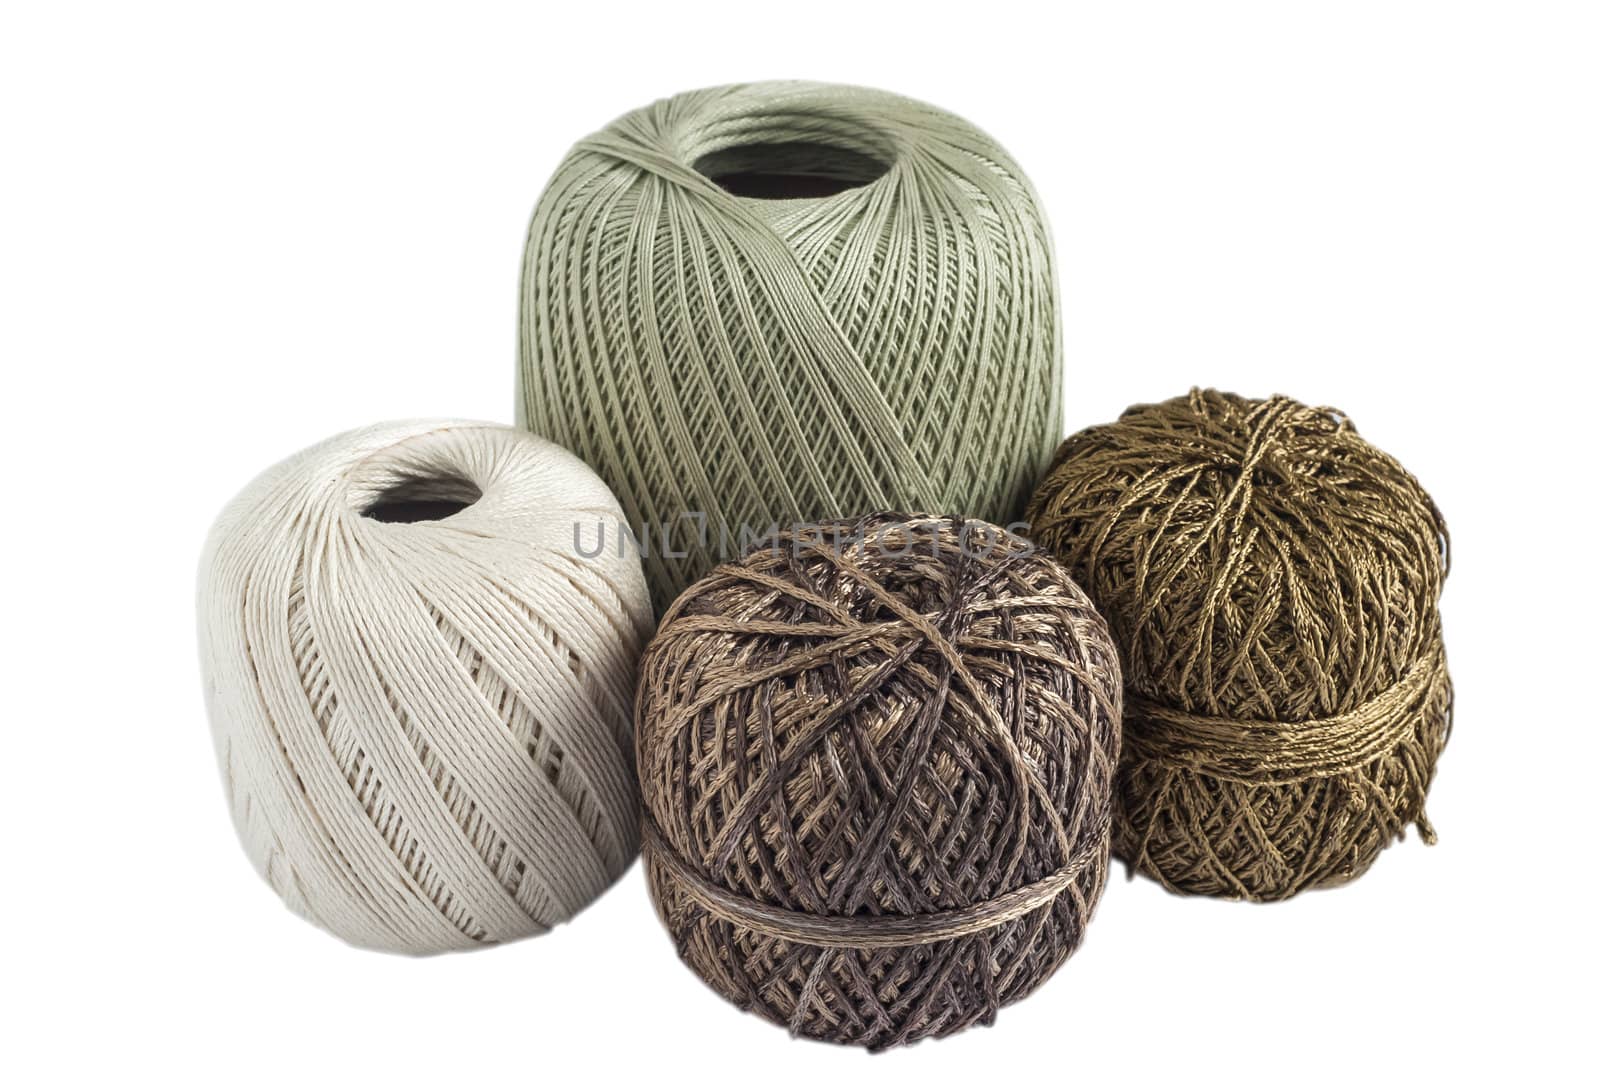 Four skeins of yarn for knitting isolated on white background